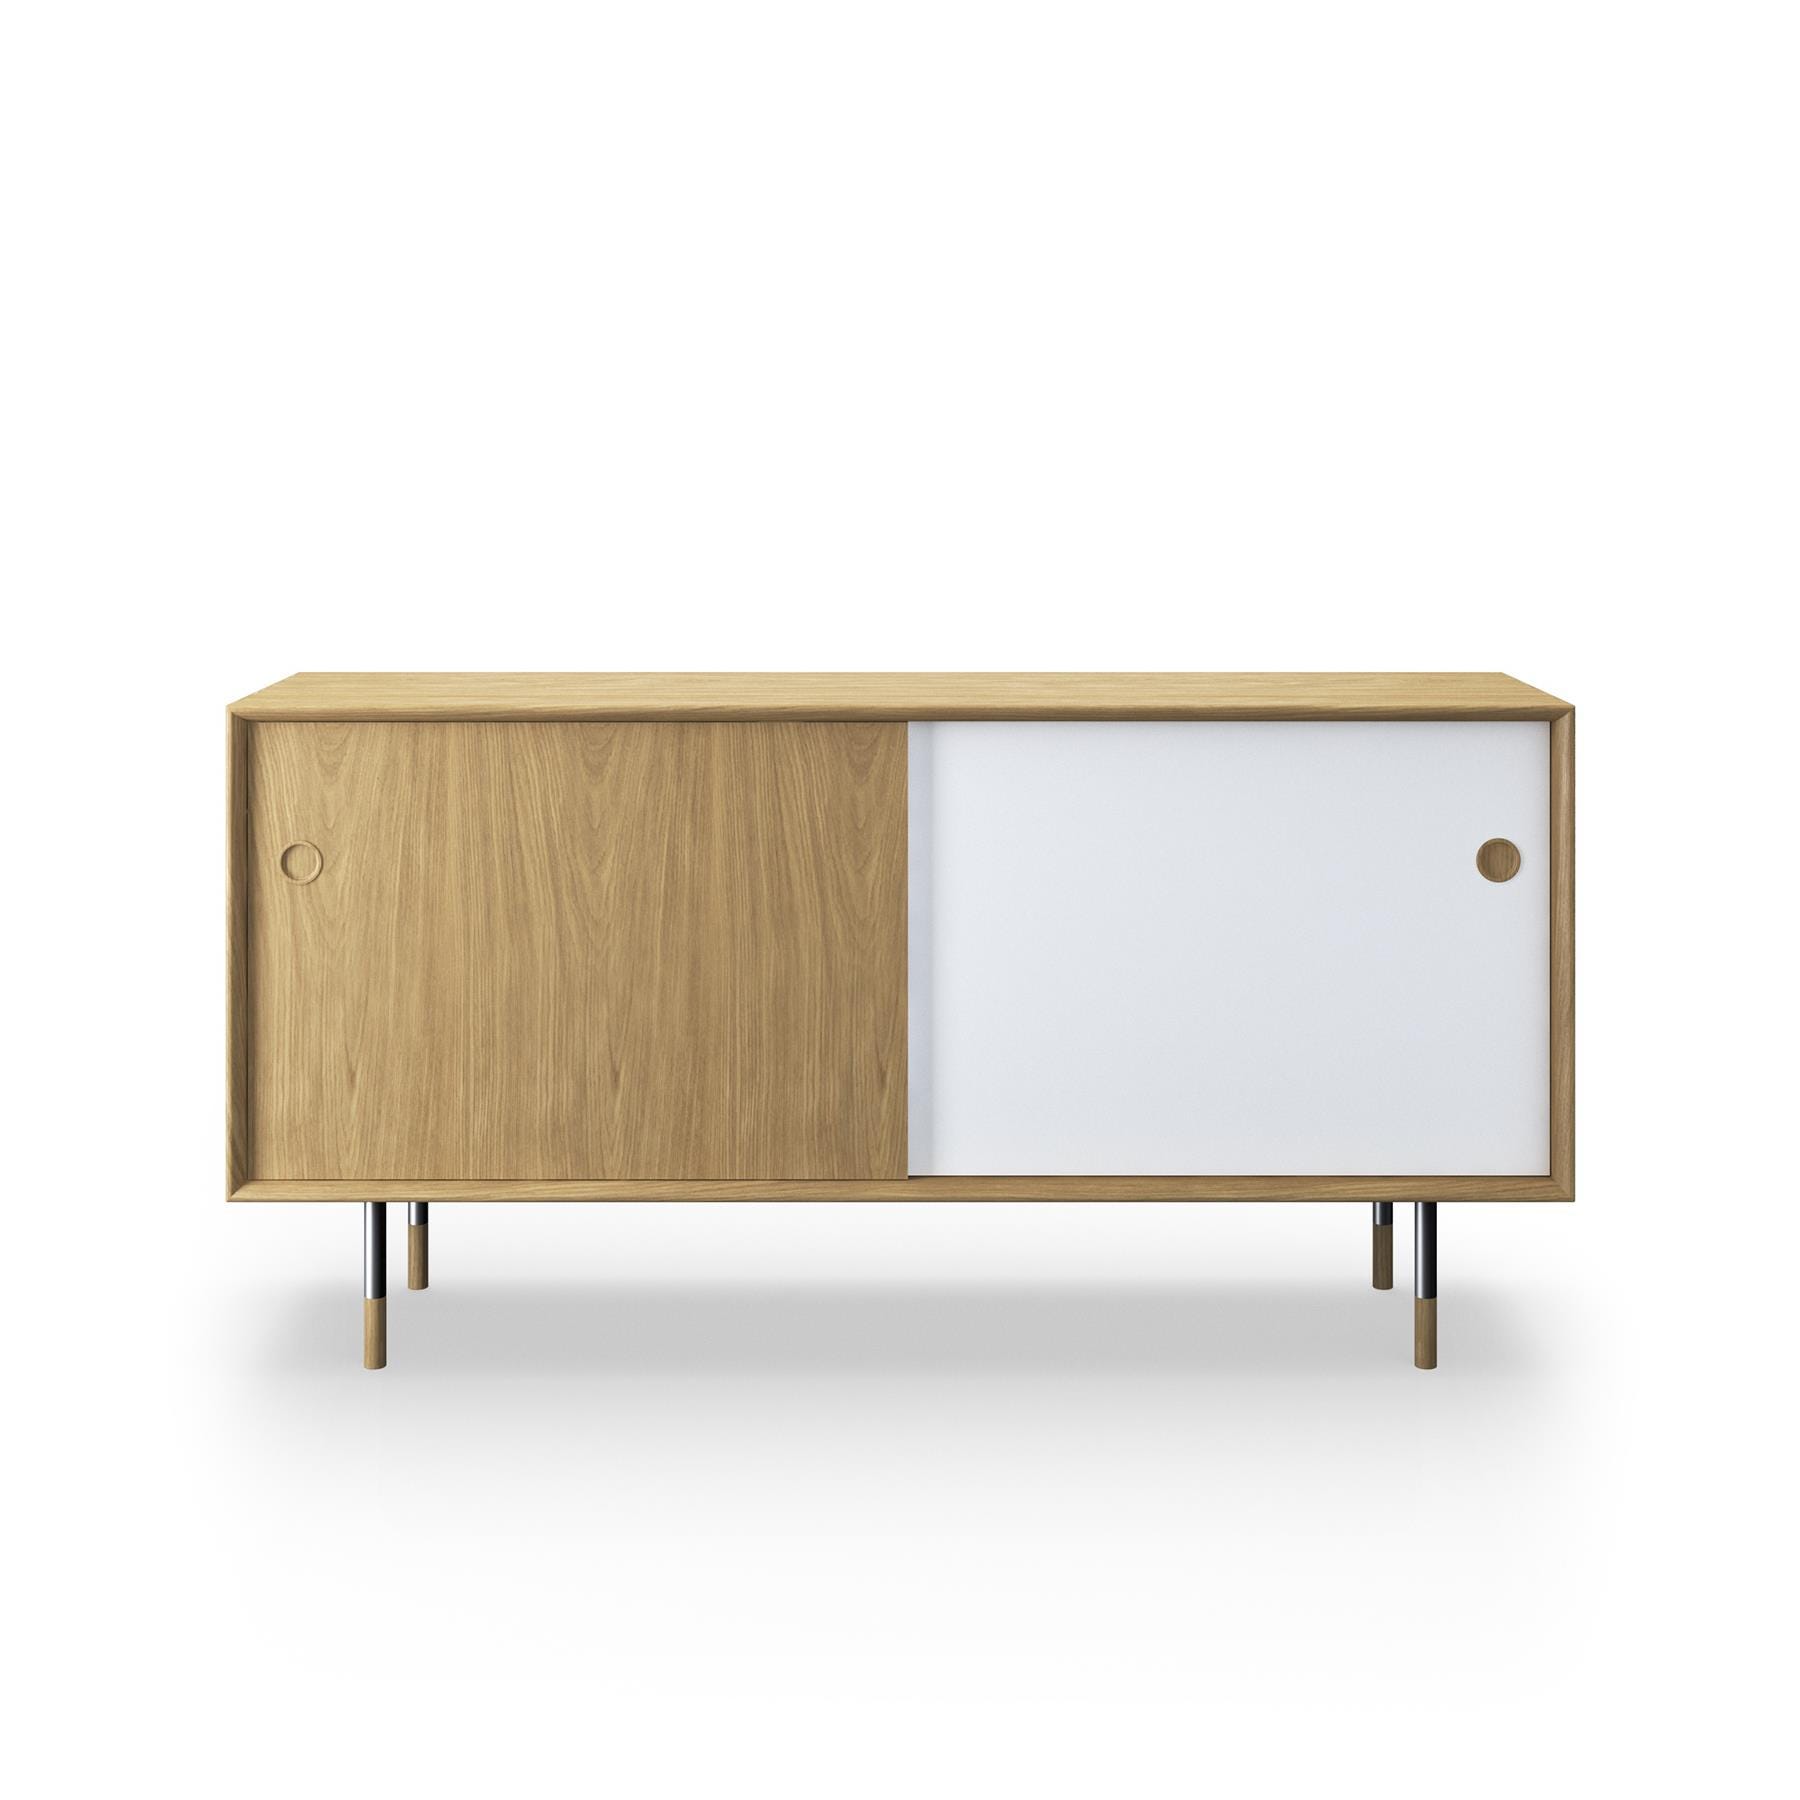 Sibast No 11 Sideboard White Oiled Oak White And Natural Front Metal Legs Light Wood Designer Furniture From Holloways Of Ludlow